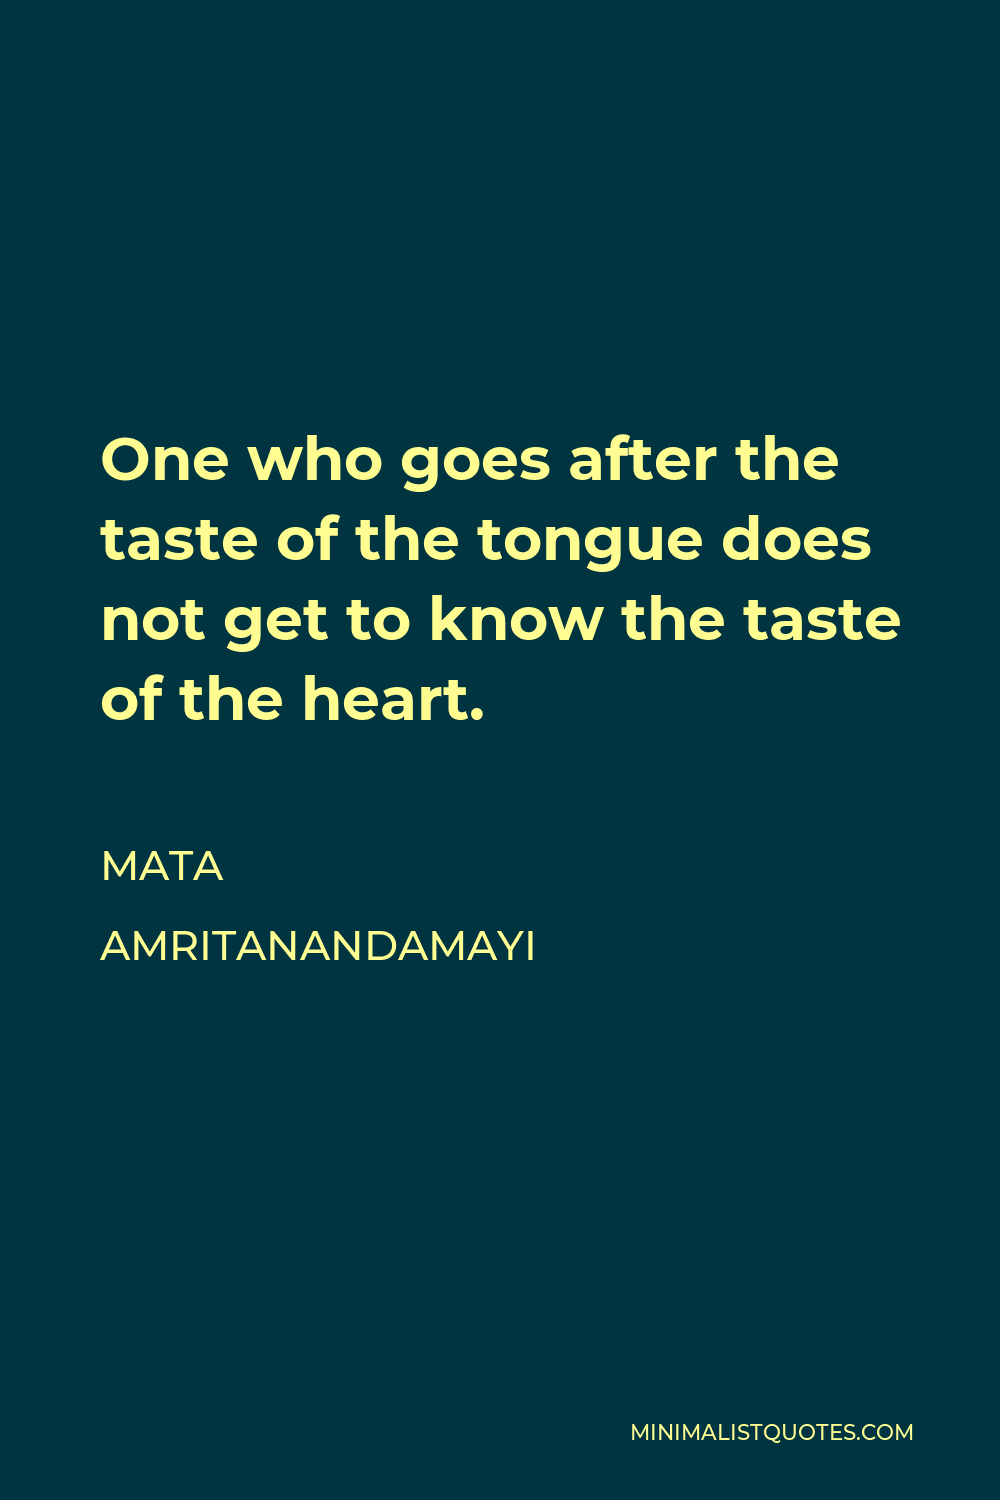 Mata Amritanandamayi Quote - One who goes after the taste of the tongue does not get to know the taste of the heart.